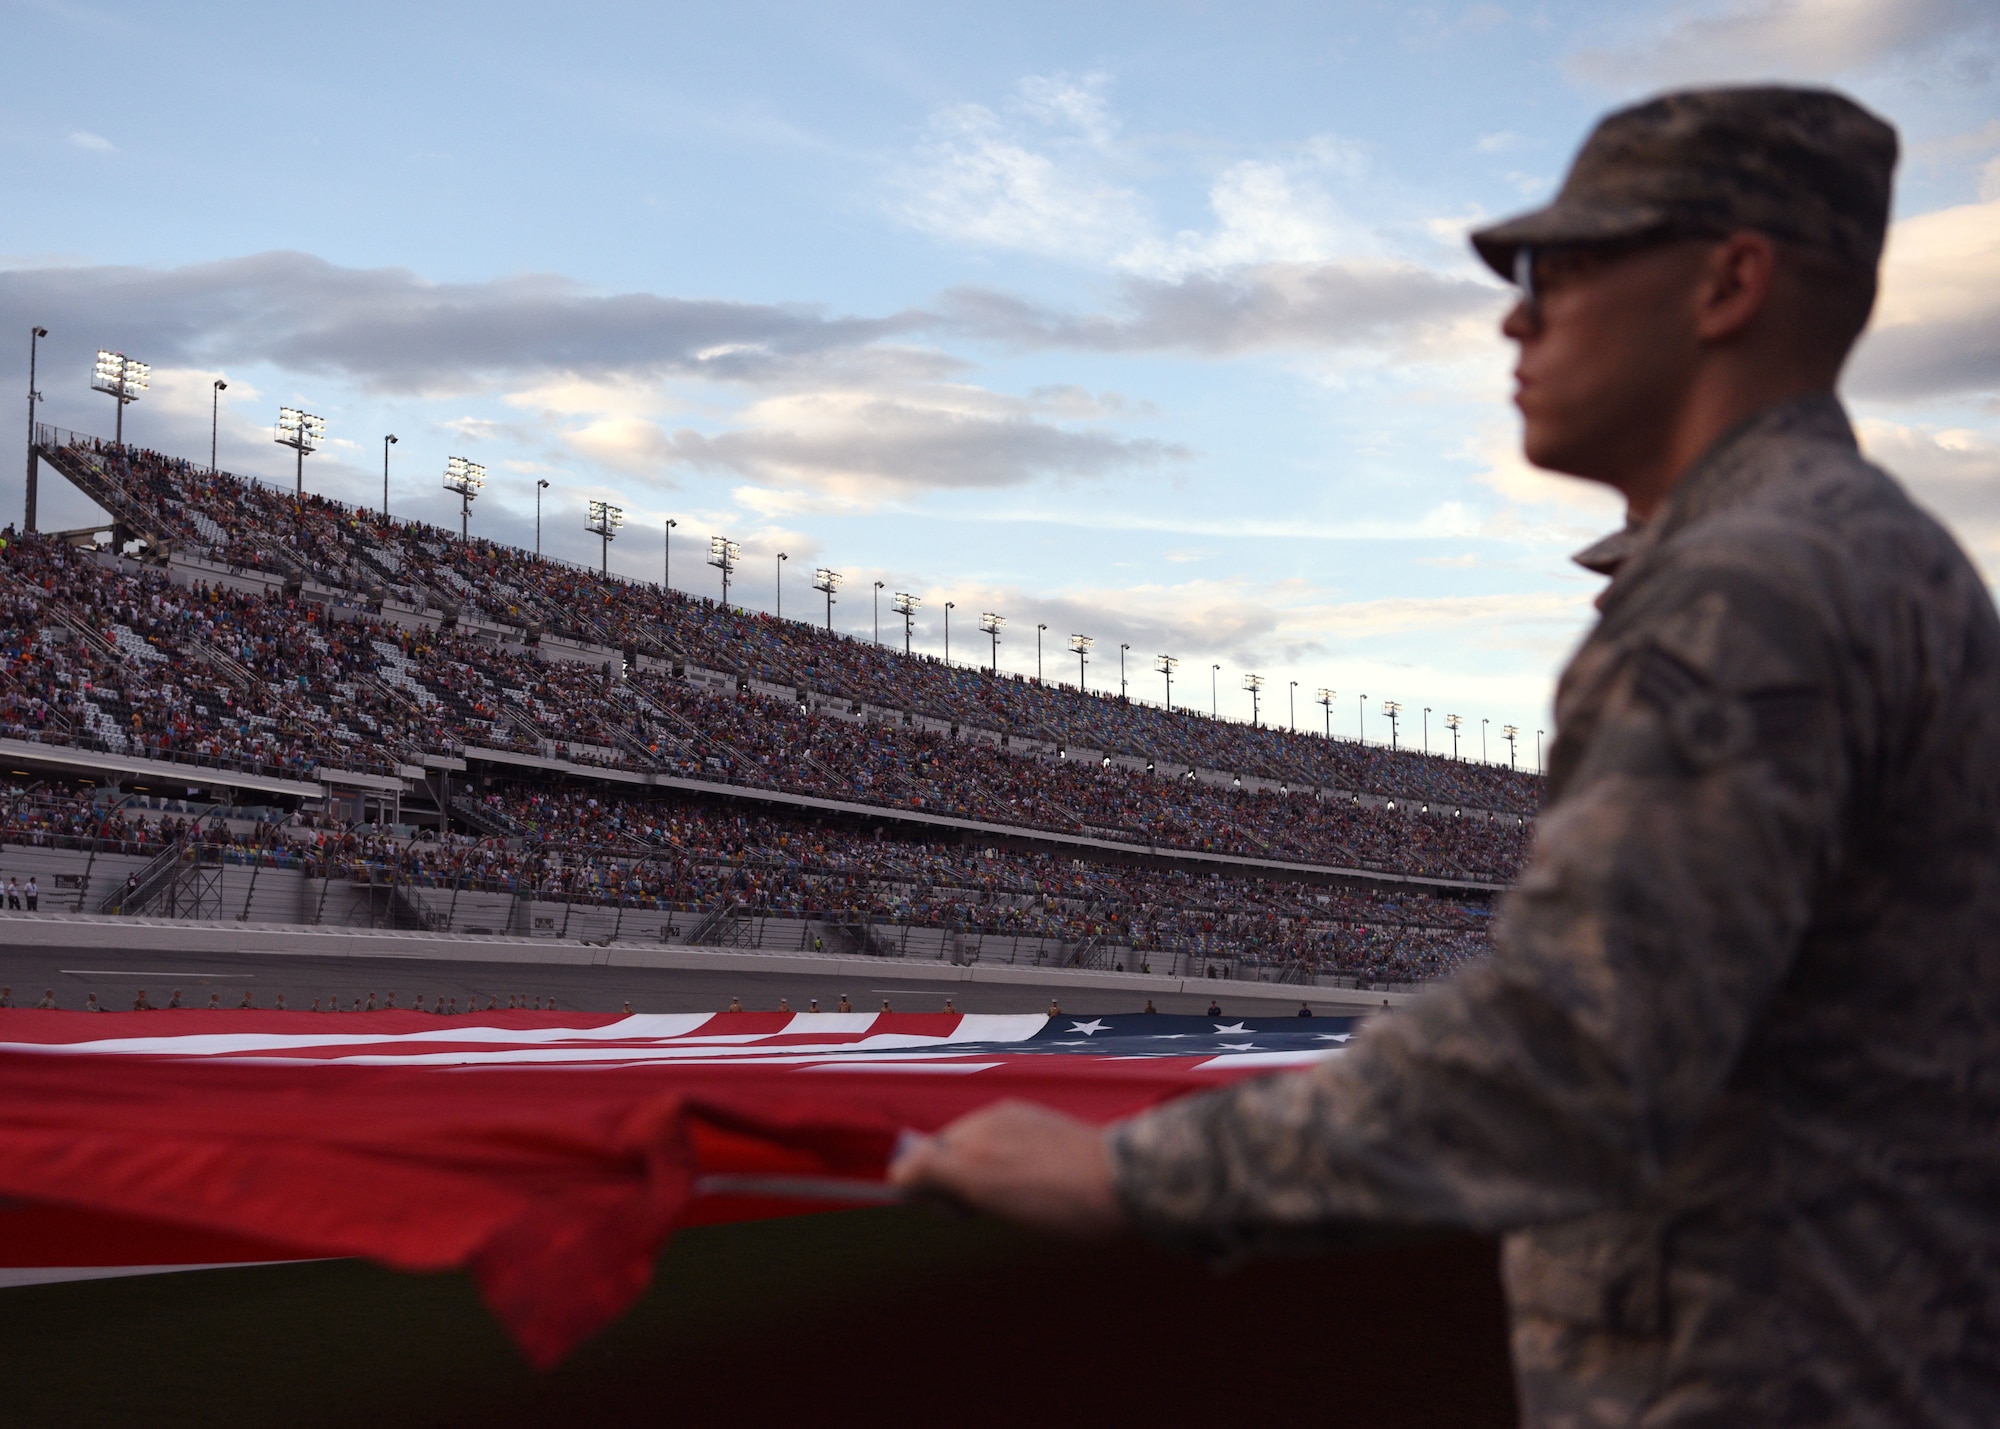 An airman from Patrick Air Force Base holds his military bearing during the National Anthem July 7, at the Daytona International Speedway in Daytona Beach, Fla. Airmen from Patrick AFB and Moody AFB were in attendance for the unfurling of the American flag – as well as representatives from all other military branches. (U.S Air Force photo by Airman 1st Class Zoe Thacker)